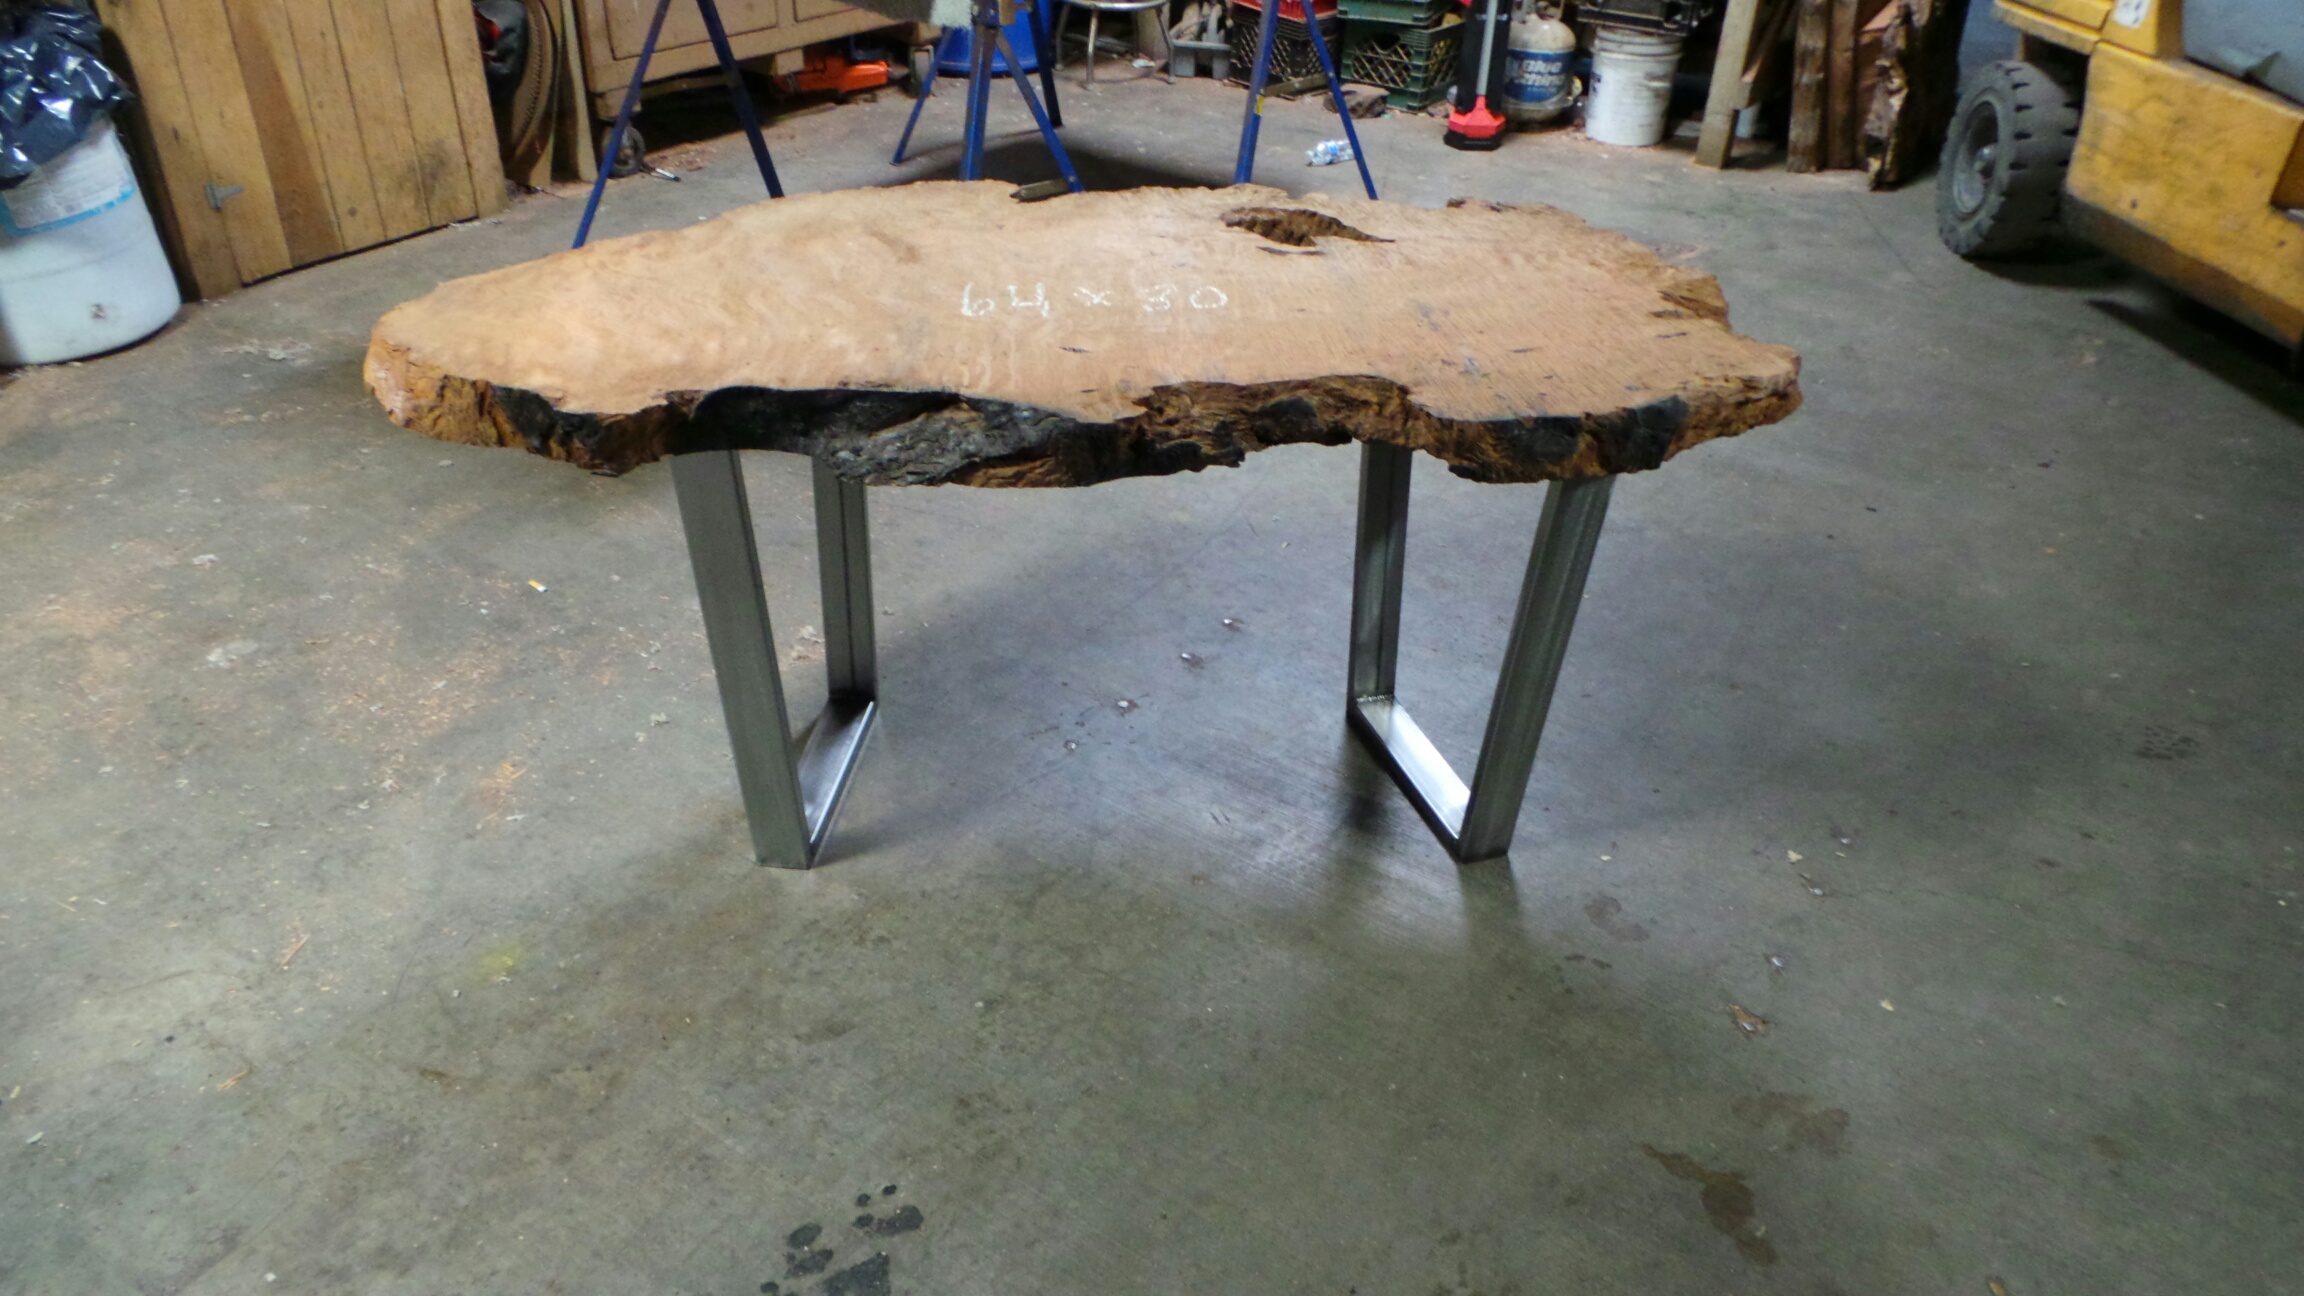 unfinished redwood table with standard metal legs (polished steel)